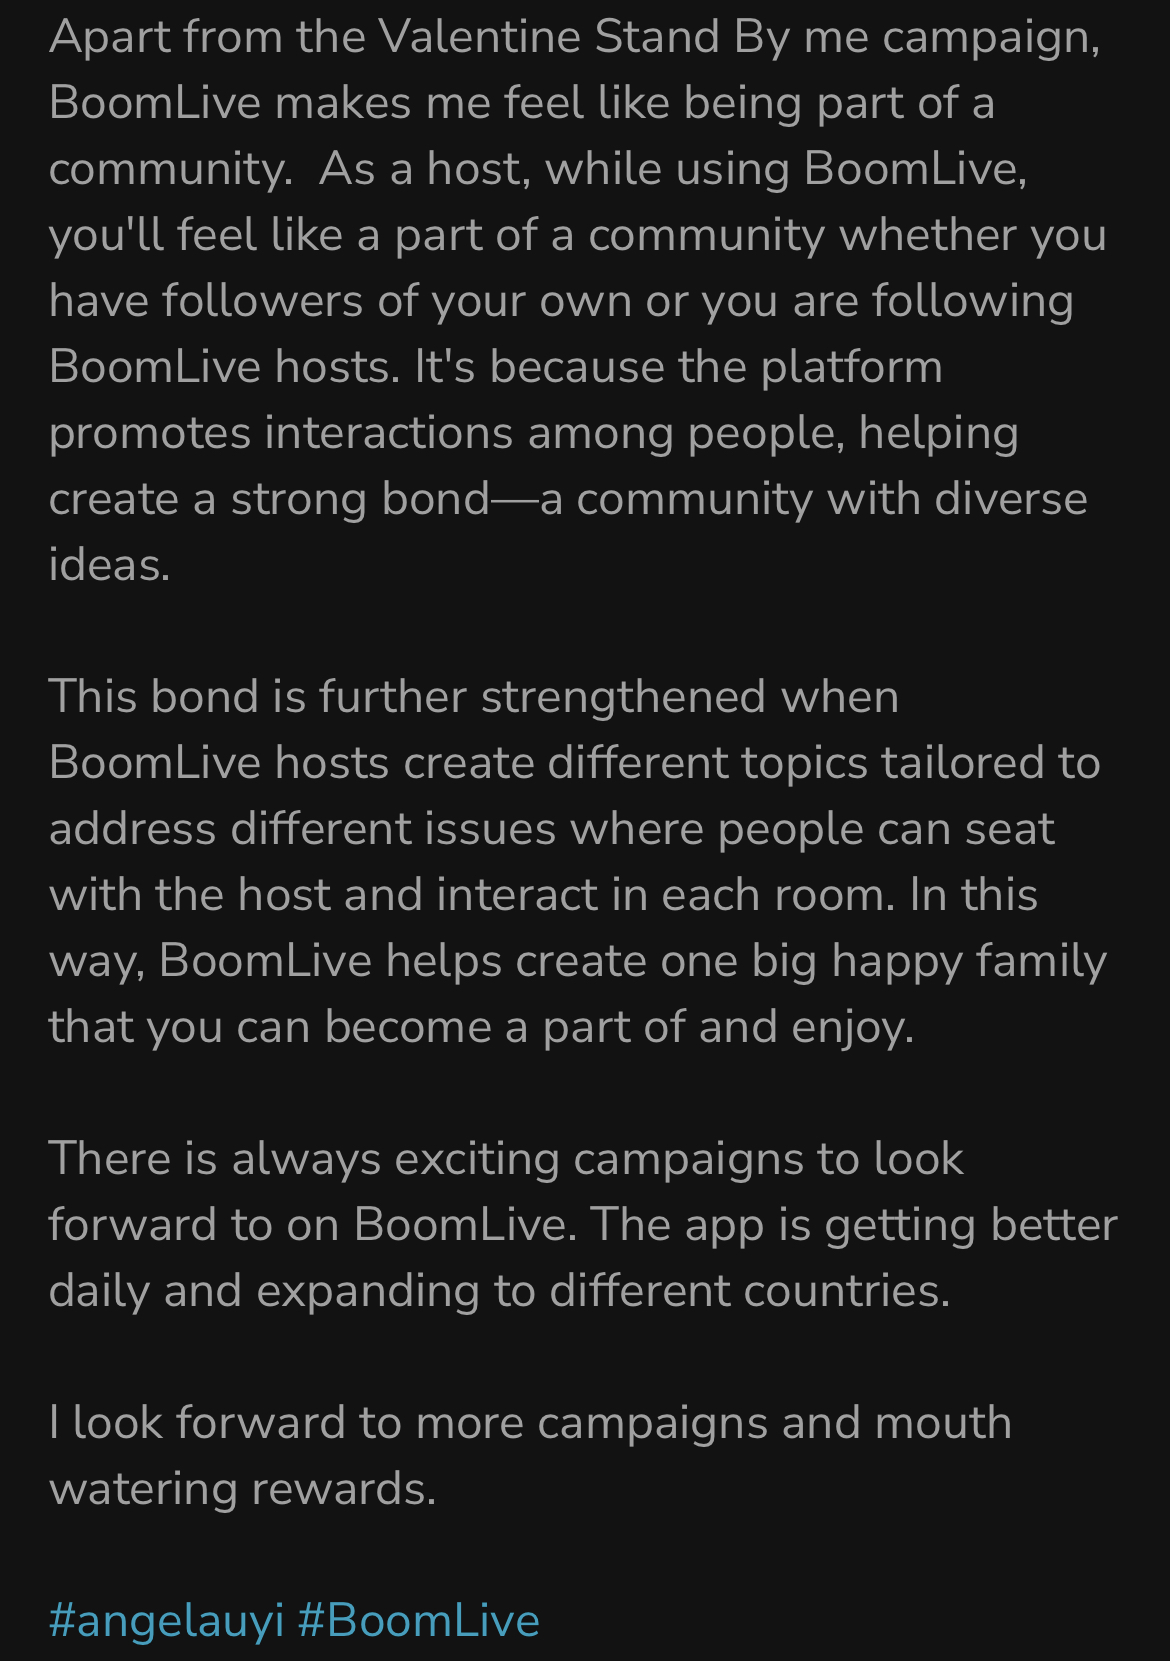 [BoomLive Experience] Angela_Uyi Shares Her Experience on BoomLive